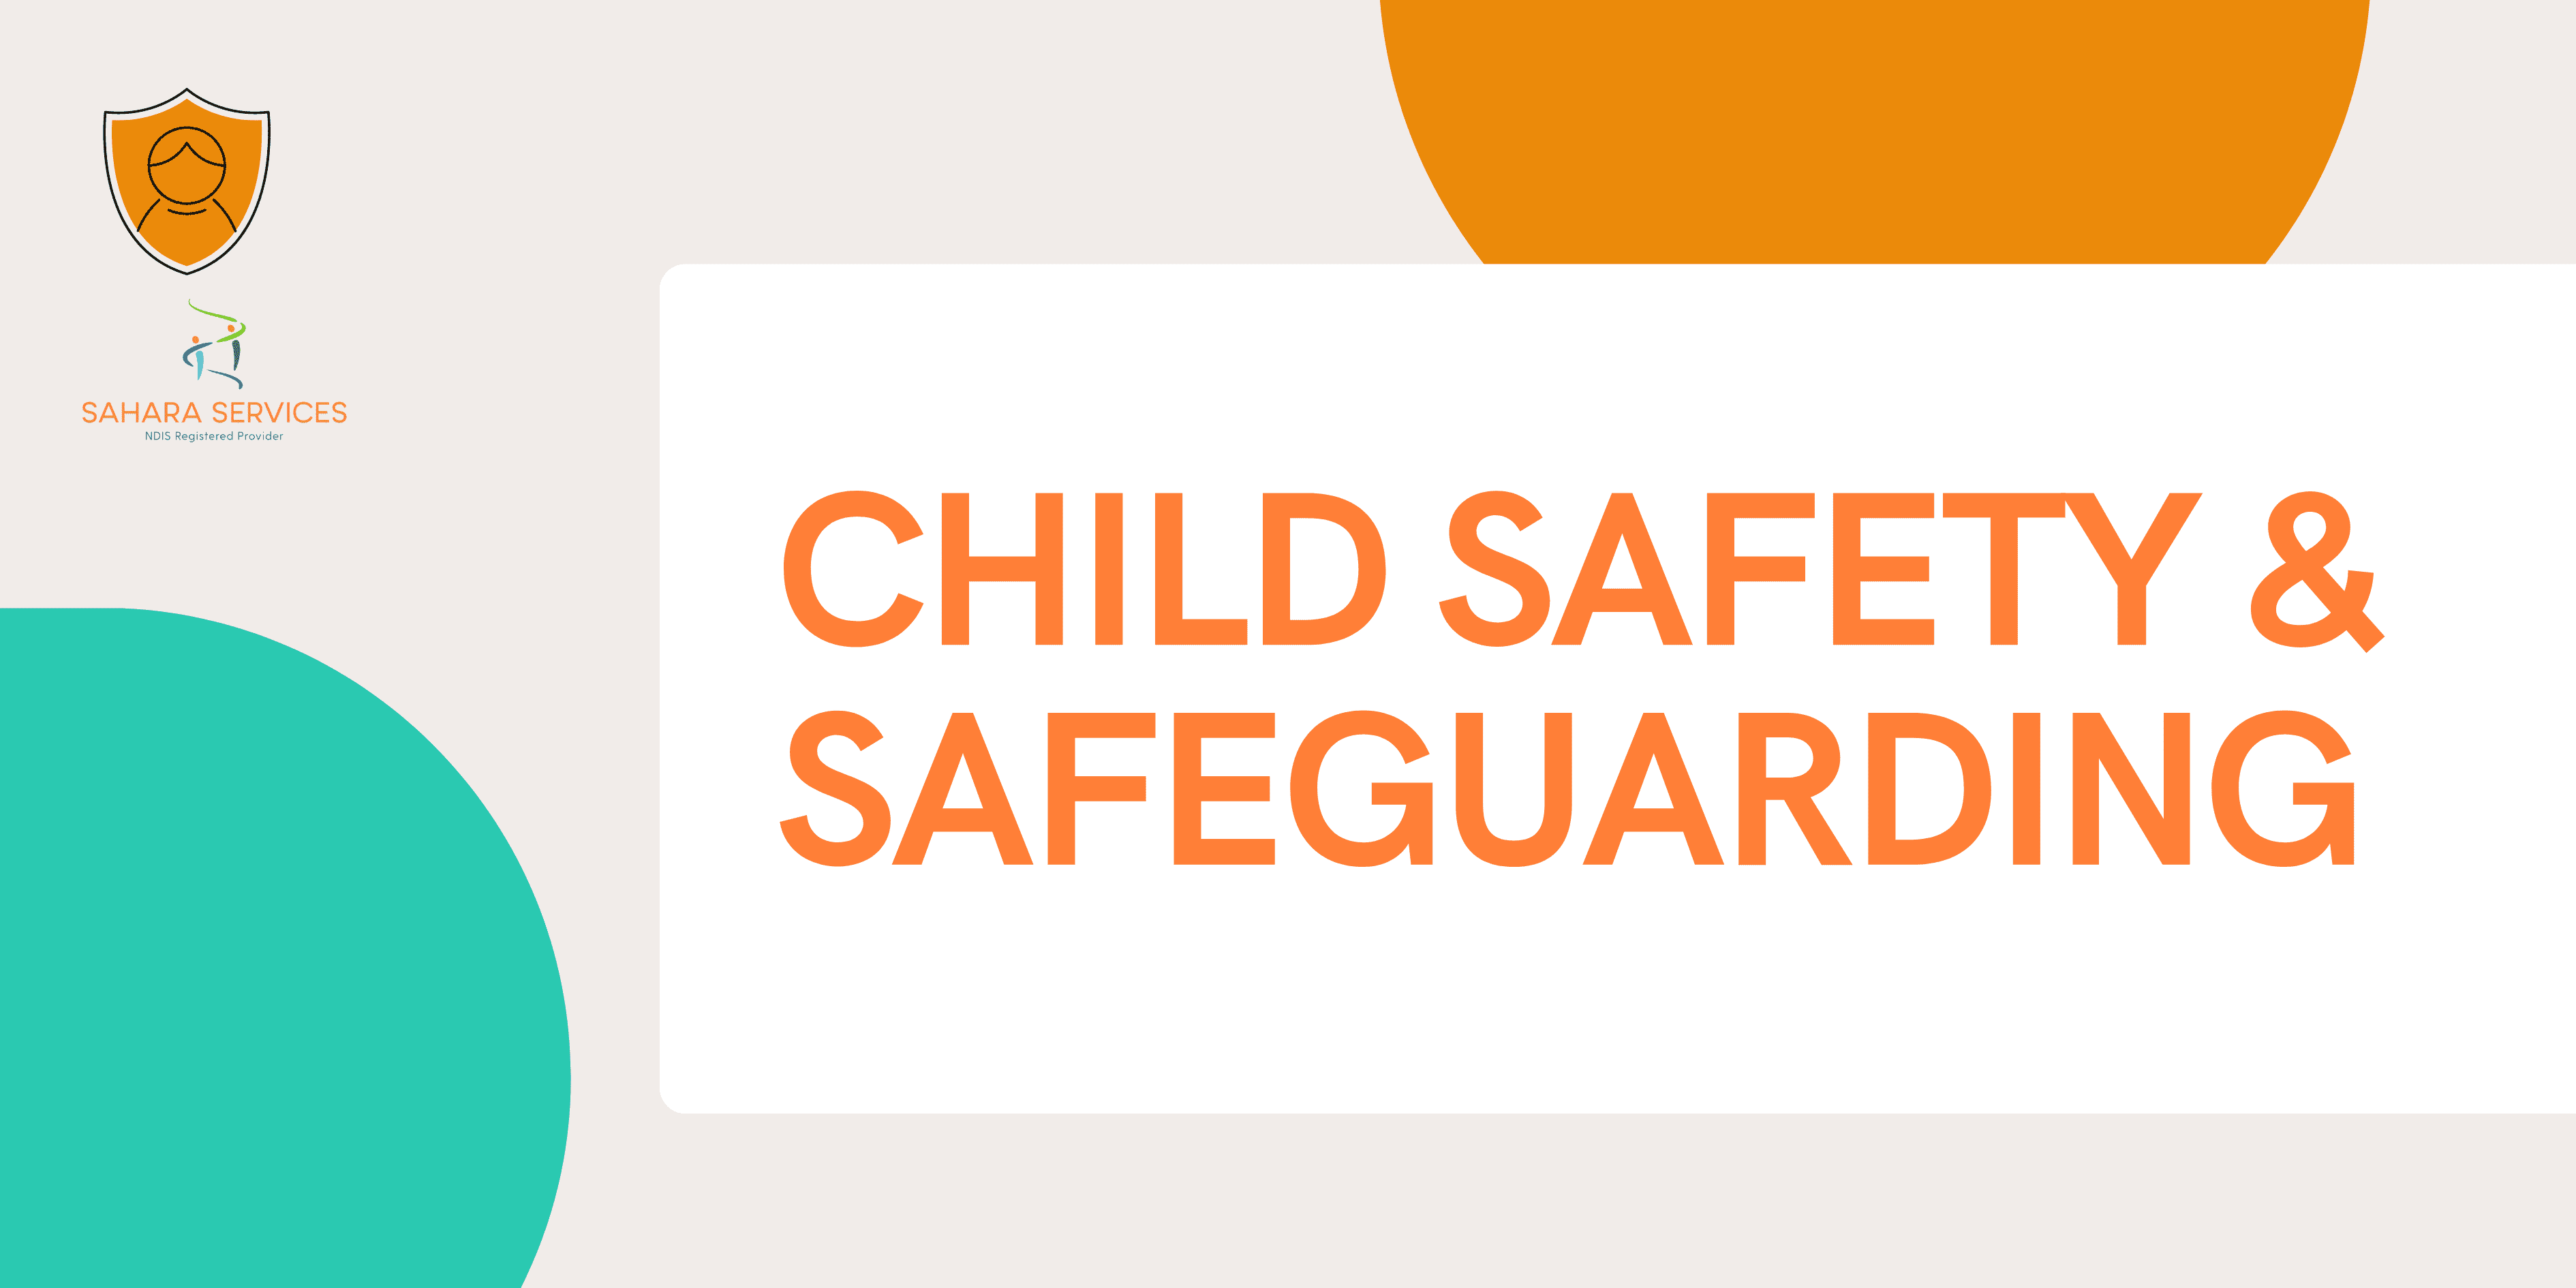 SAHARA SERVICES COMMITMENT TO CHILD SAFETY AND SAFEGUARDING